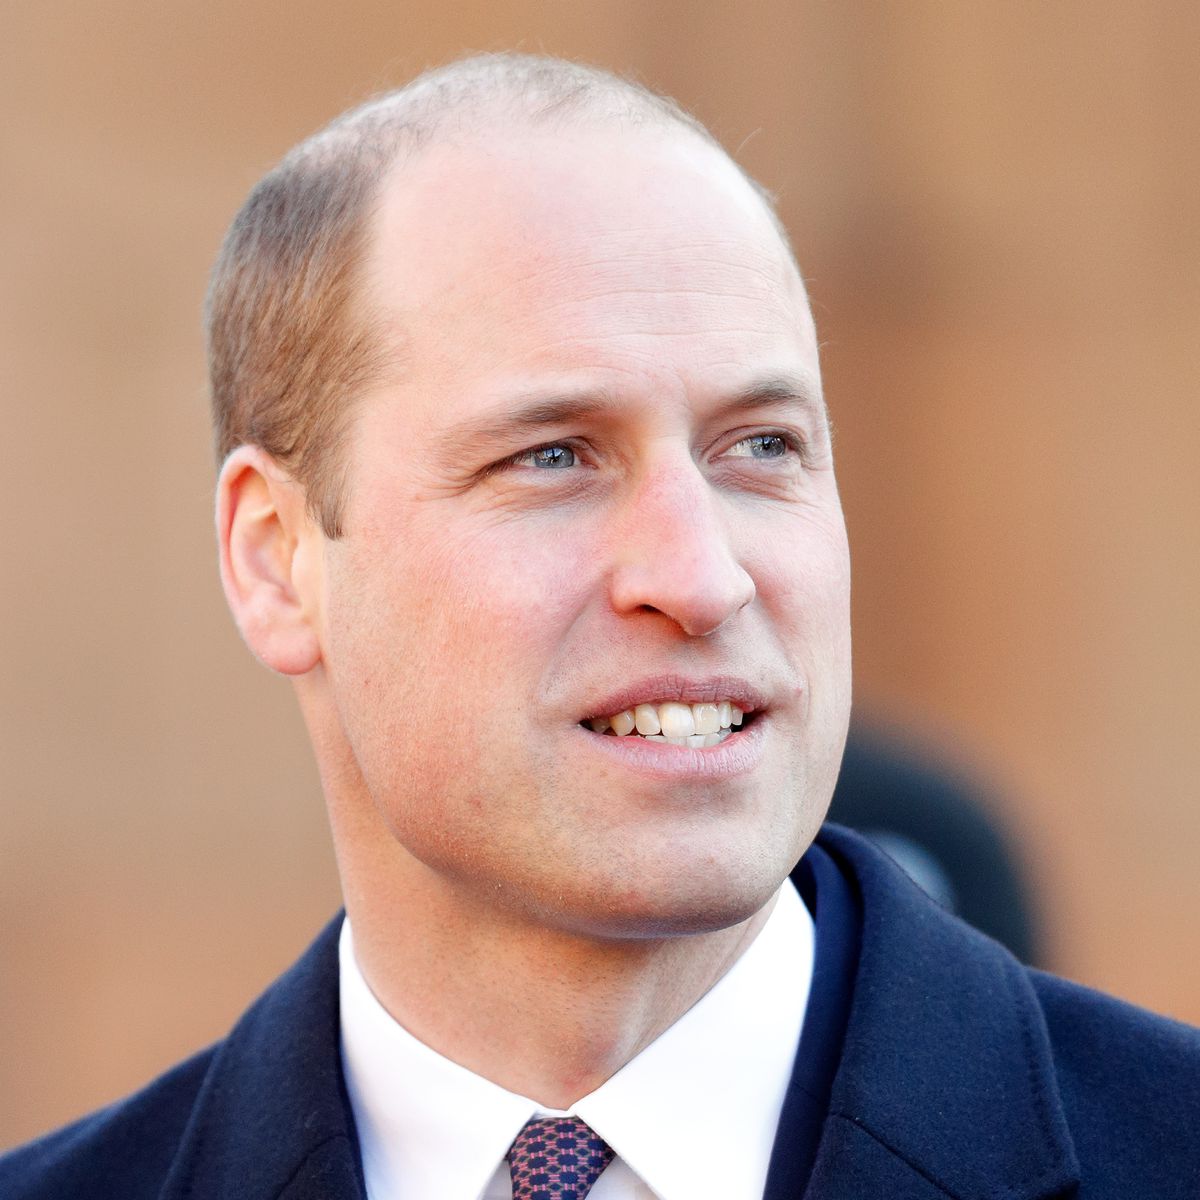 Prince william young